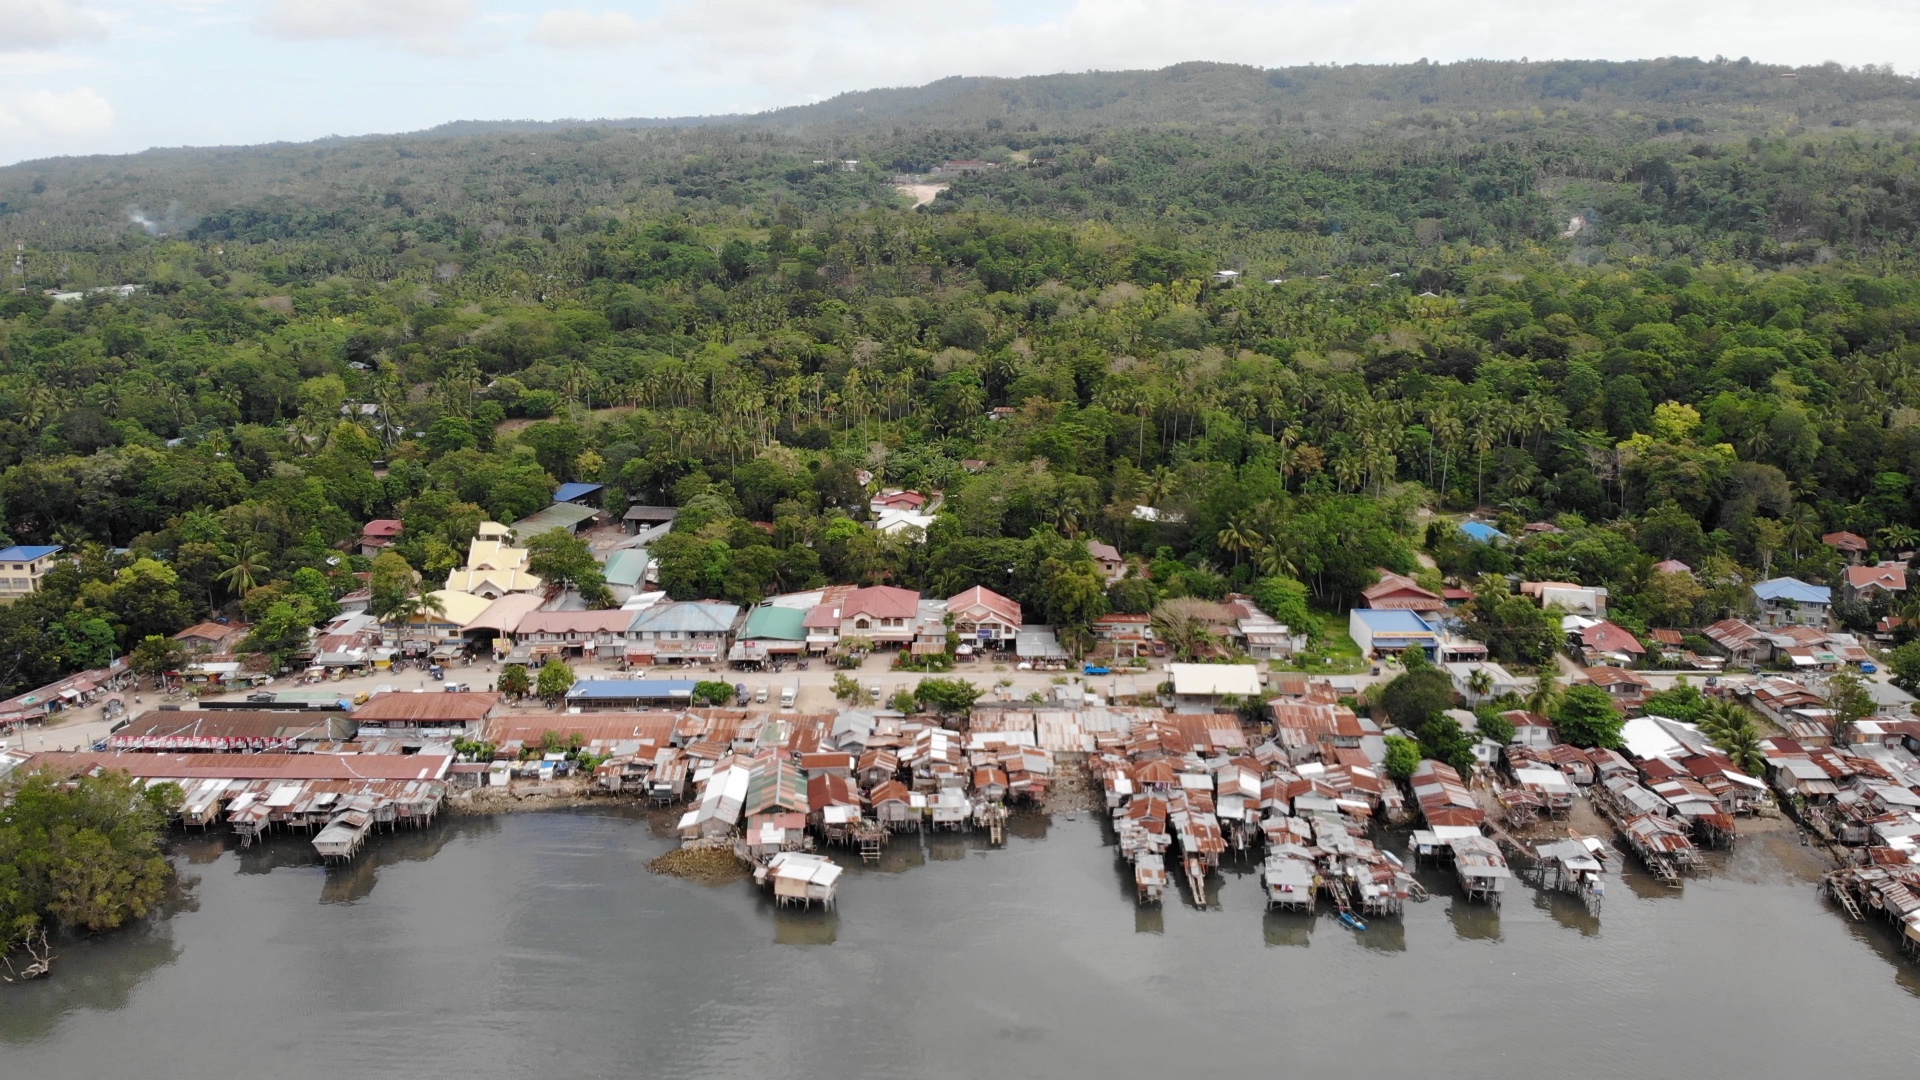 Drone Panorama of a Fishing Village on Gloomy Day